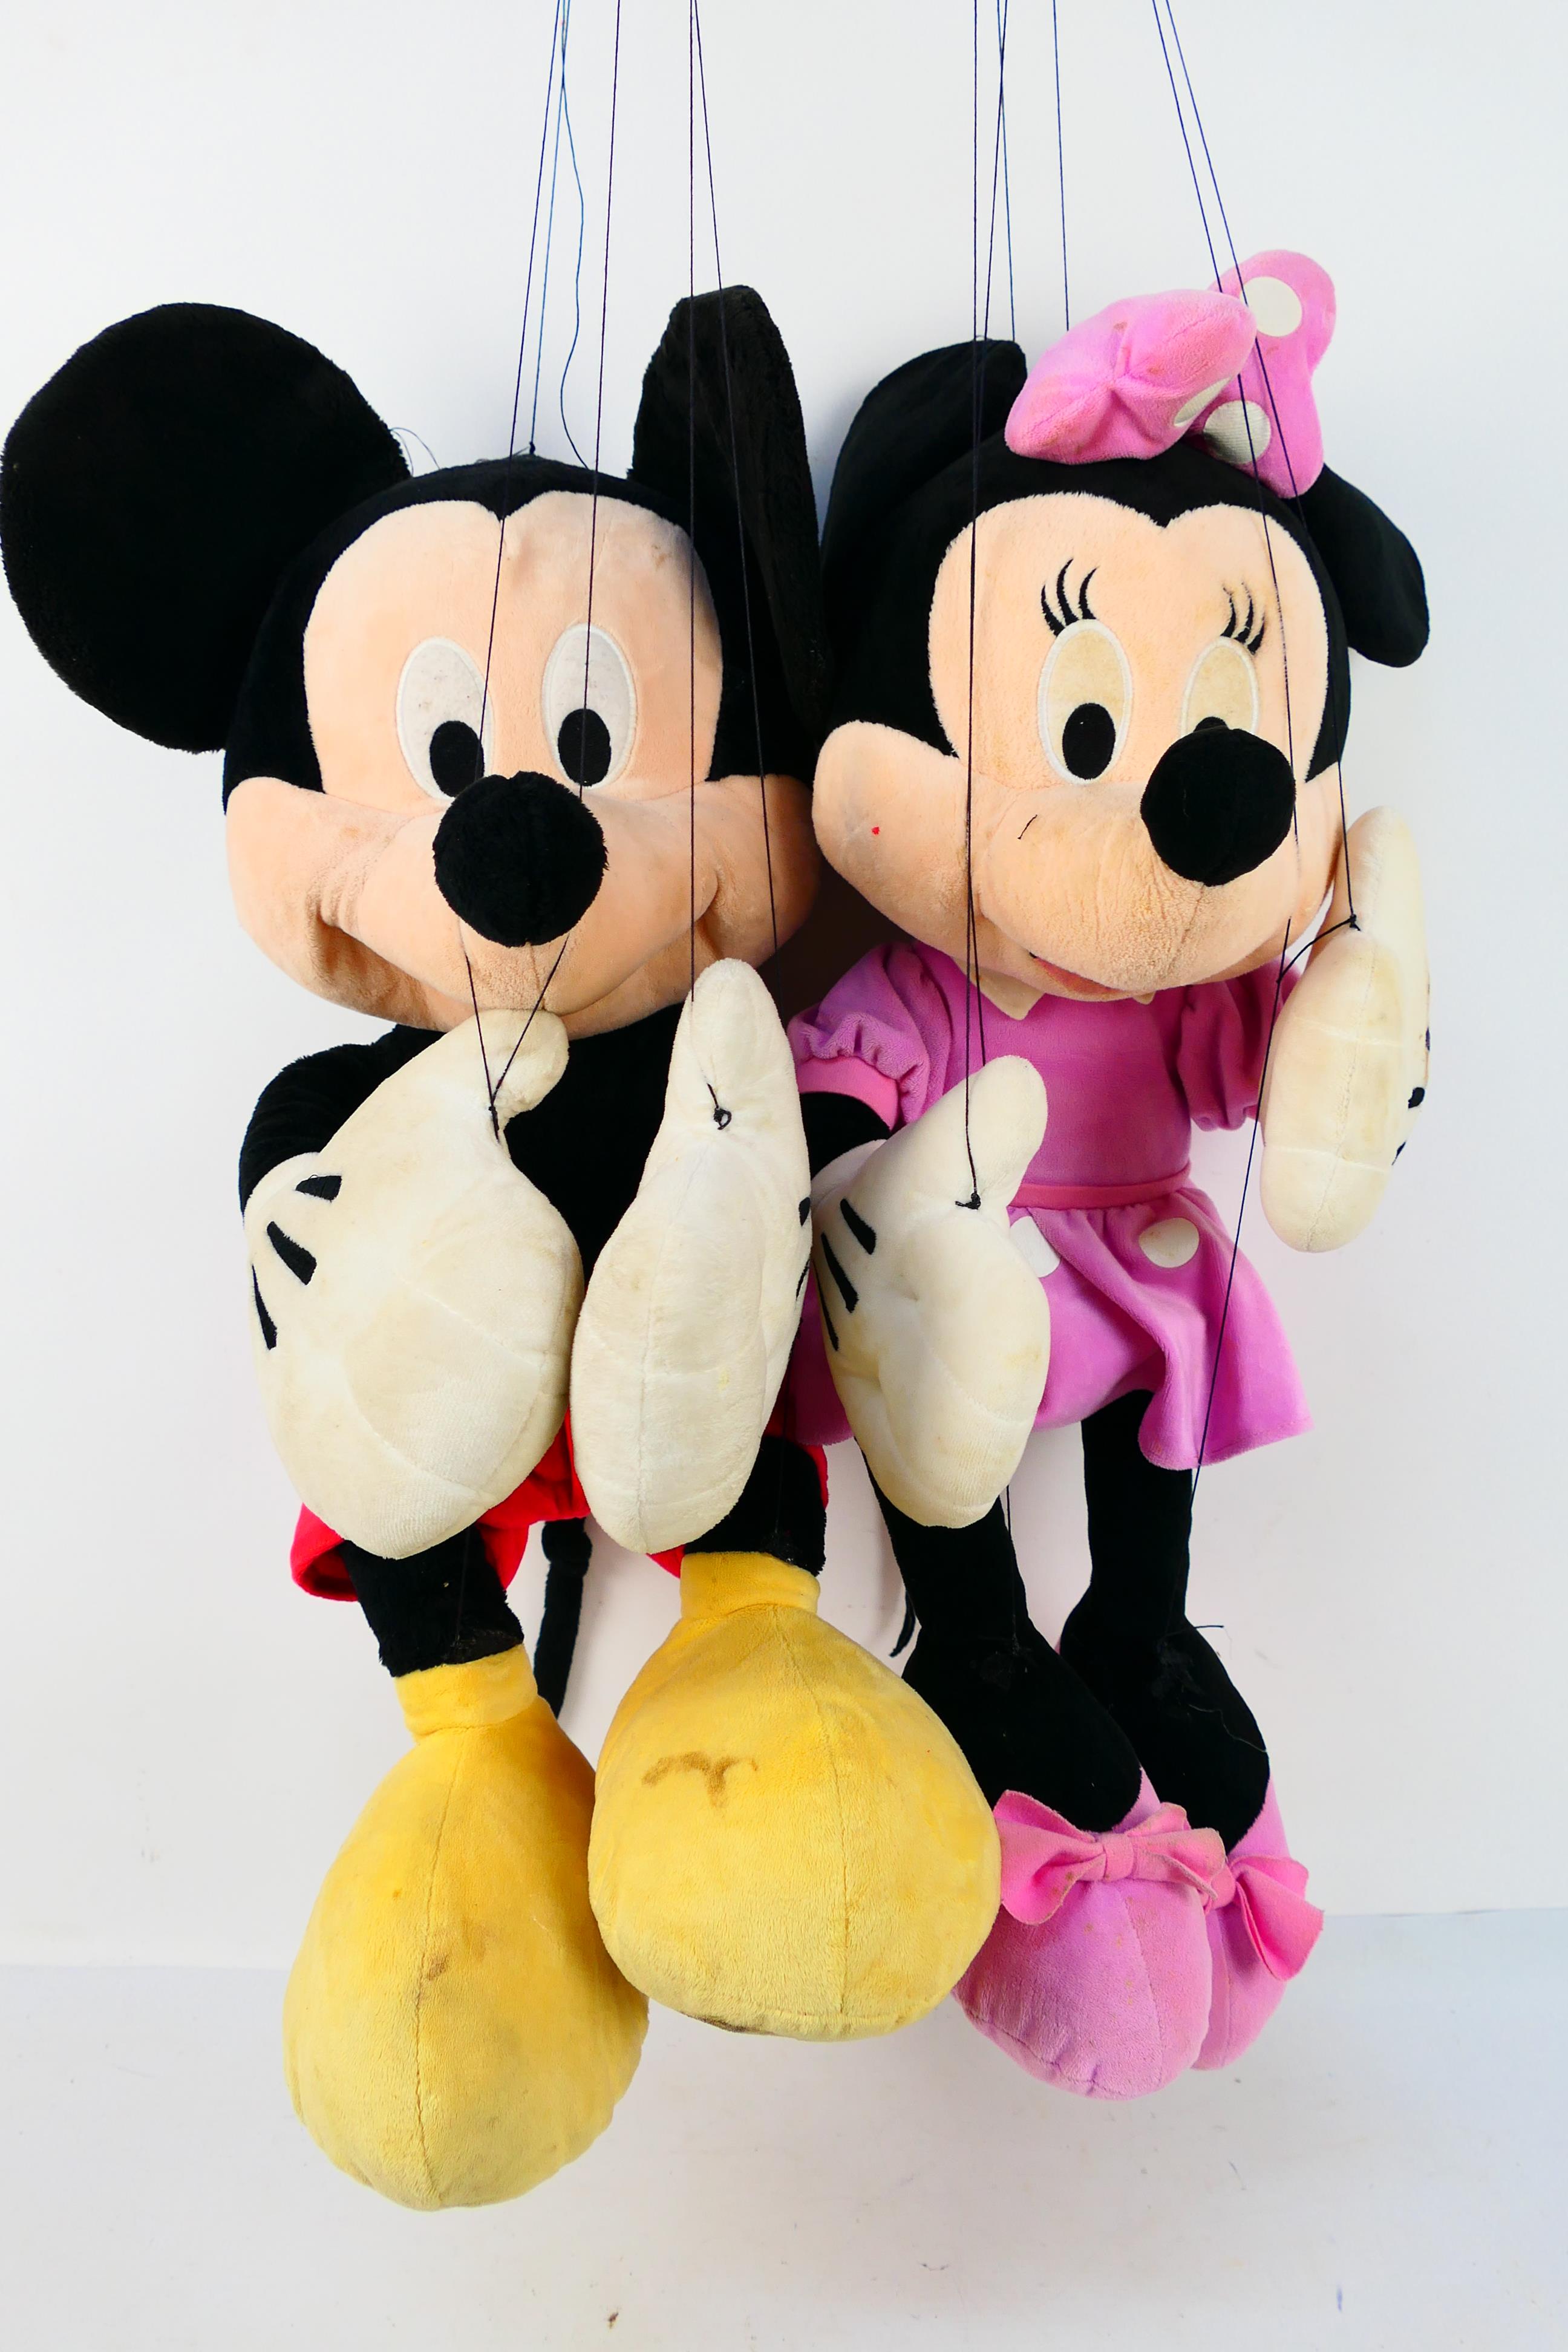 Marionettes - Mickey Mouse - Minnie Mouse. - Image 4 of 5